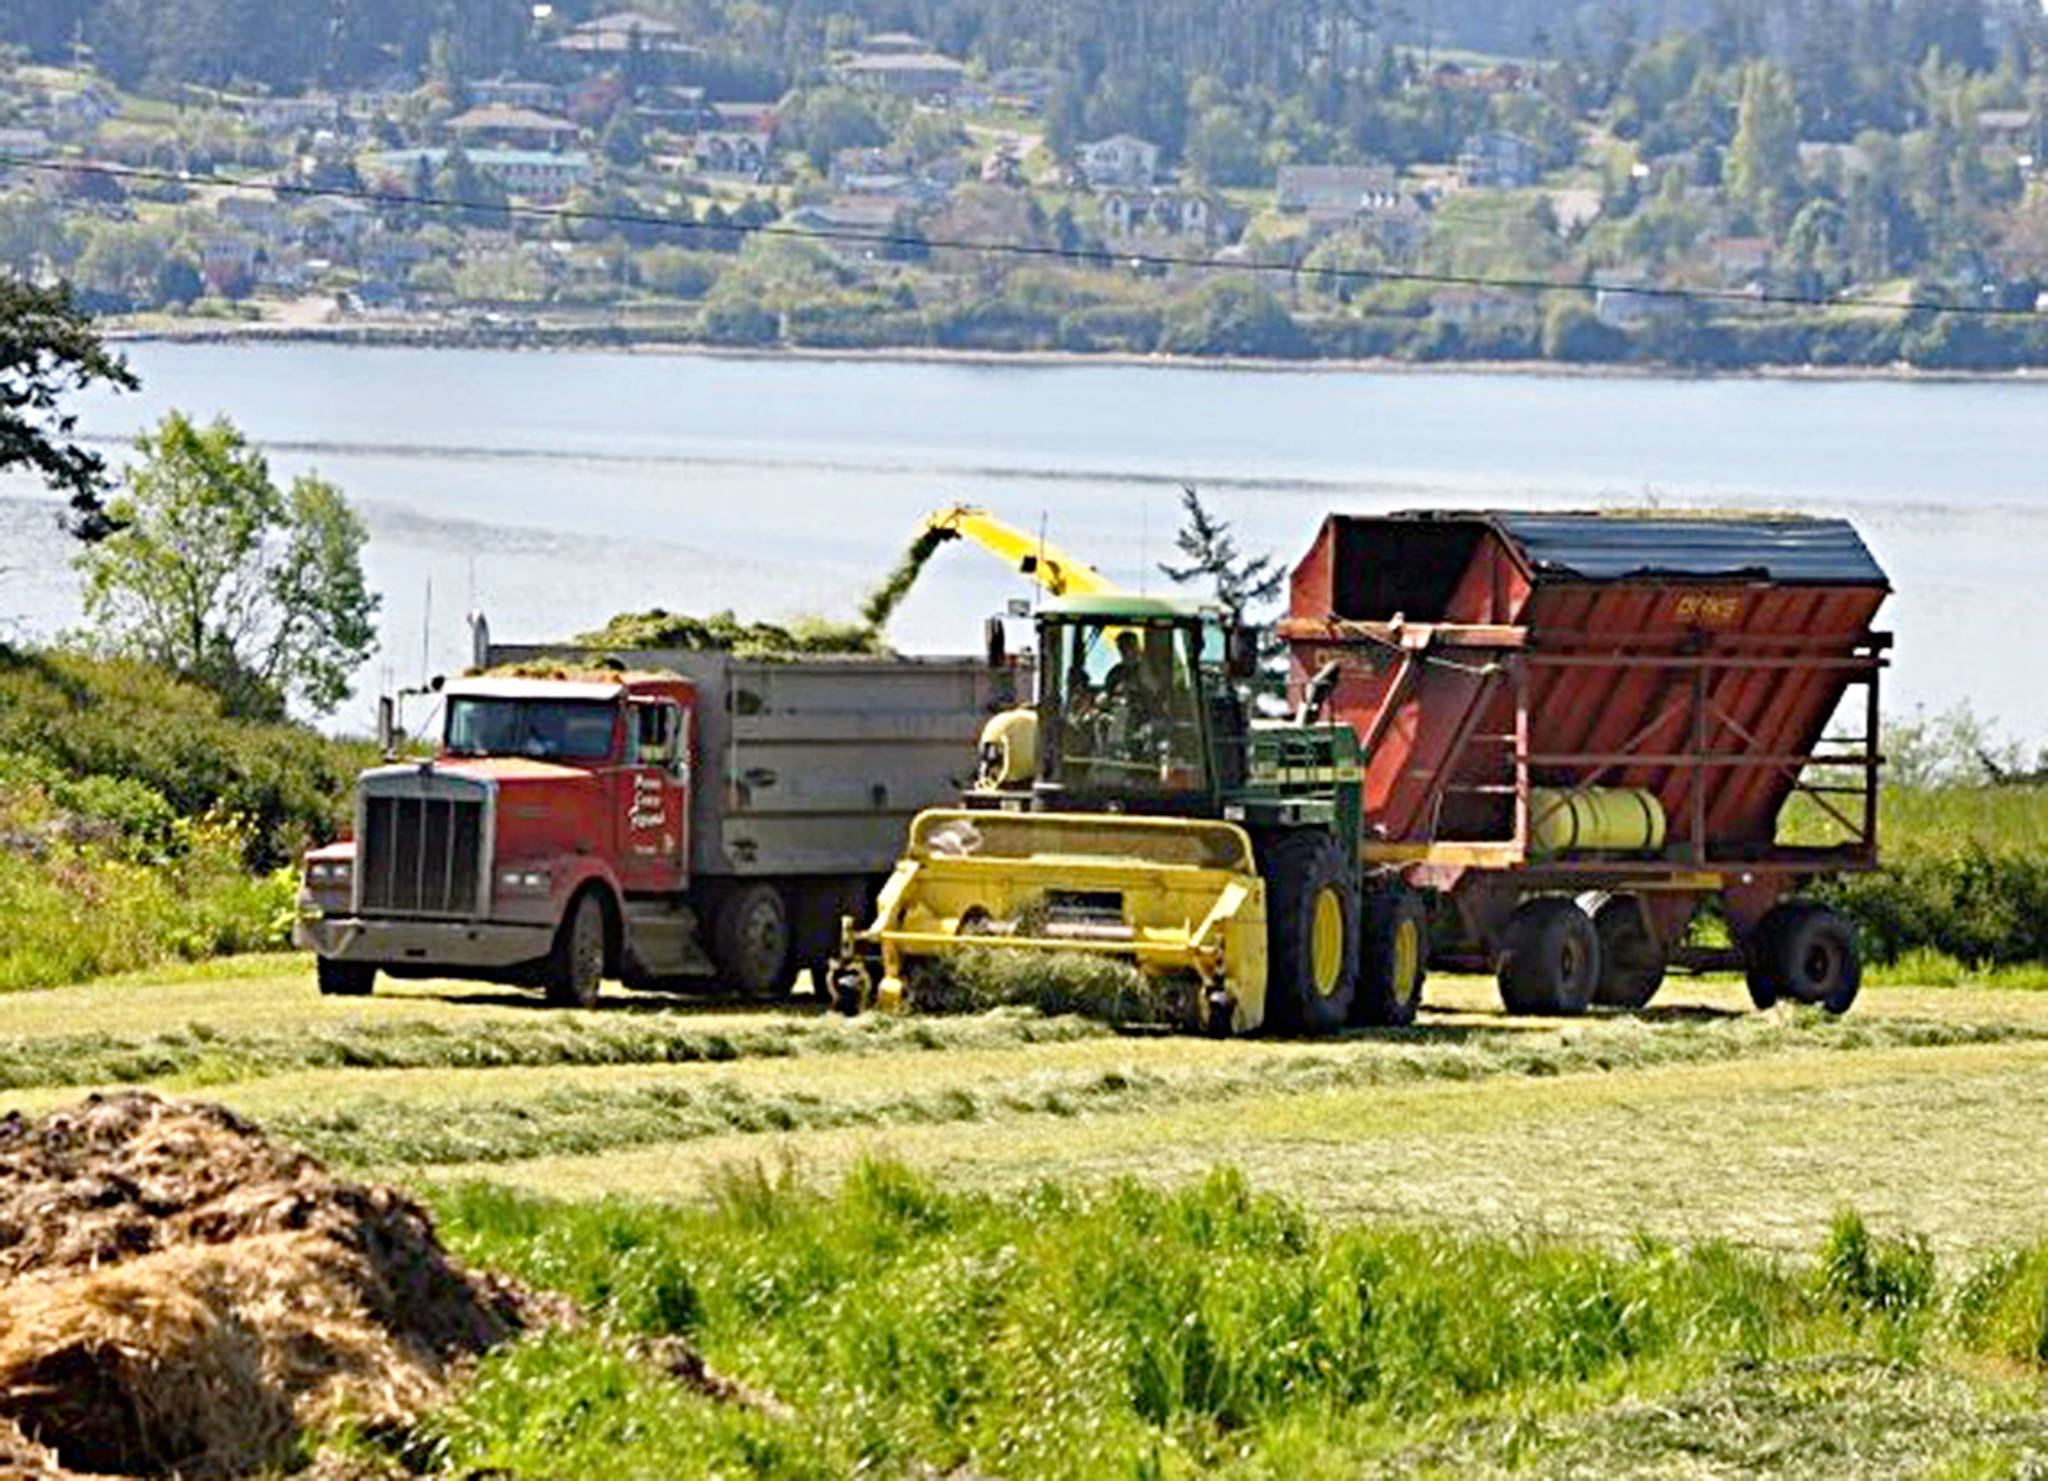 Conservation Future Funds will help Penn Cove Farms, that raises dairy calves for western Washington daires and grows feed, obtain easements to ensure its 129 acres remains agricultural. It is among three projects receiving $1.1 million of the taxpayer-funded program. Photo provided by Whidbey Camano Land Trust